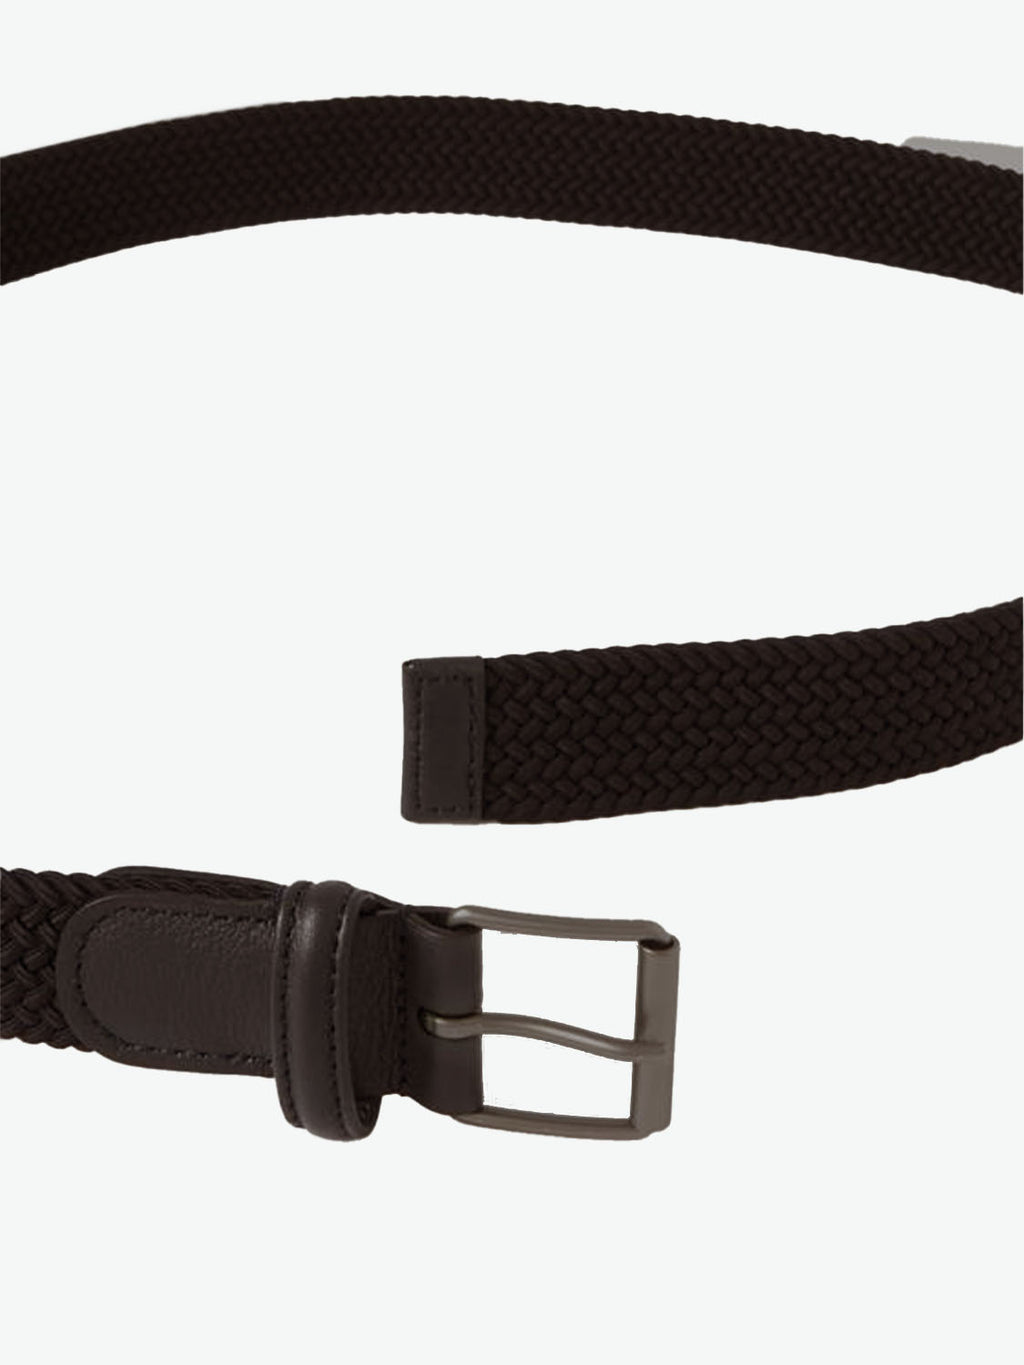 Anderson's Leather-Trimmed Woven Belt Dark Brown